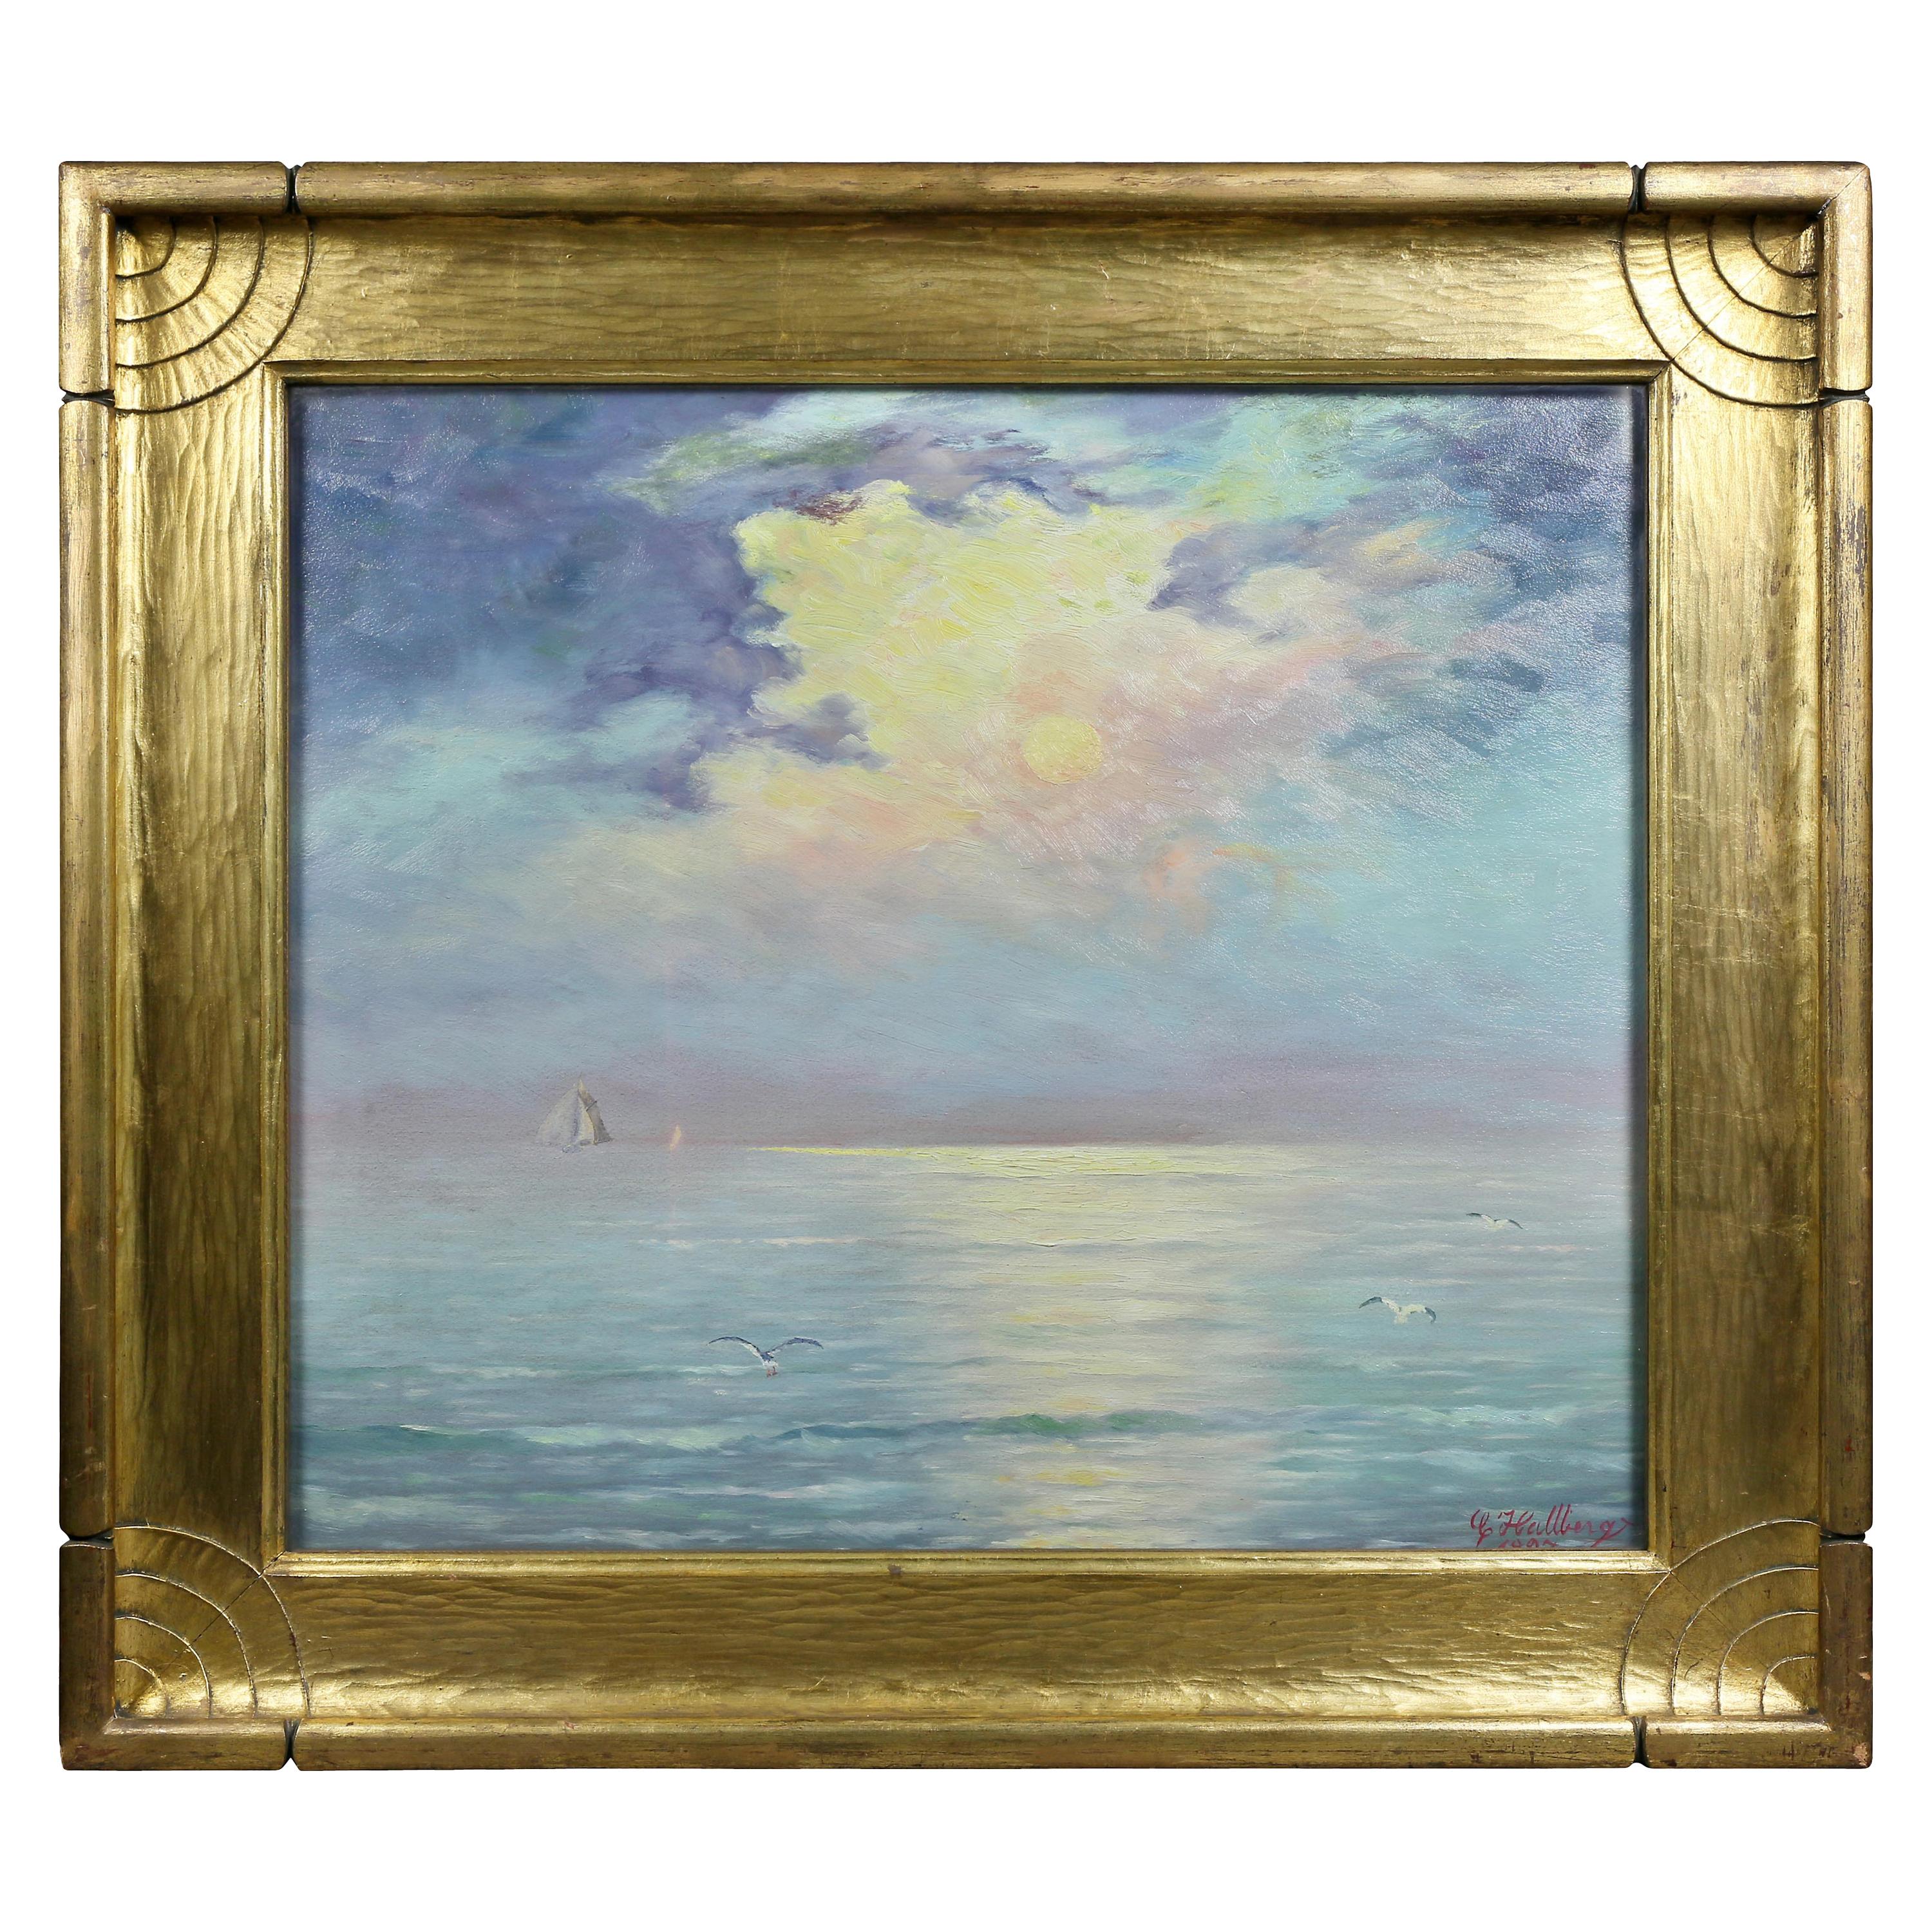 Framed Oil on Board by Charles Edward Hallberg of One of the Great Lakes